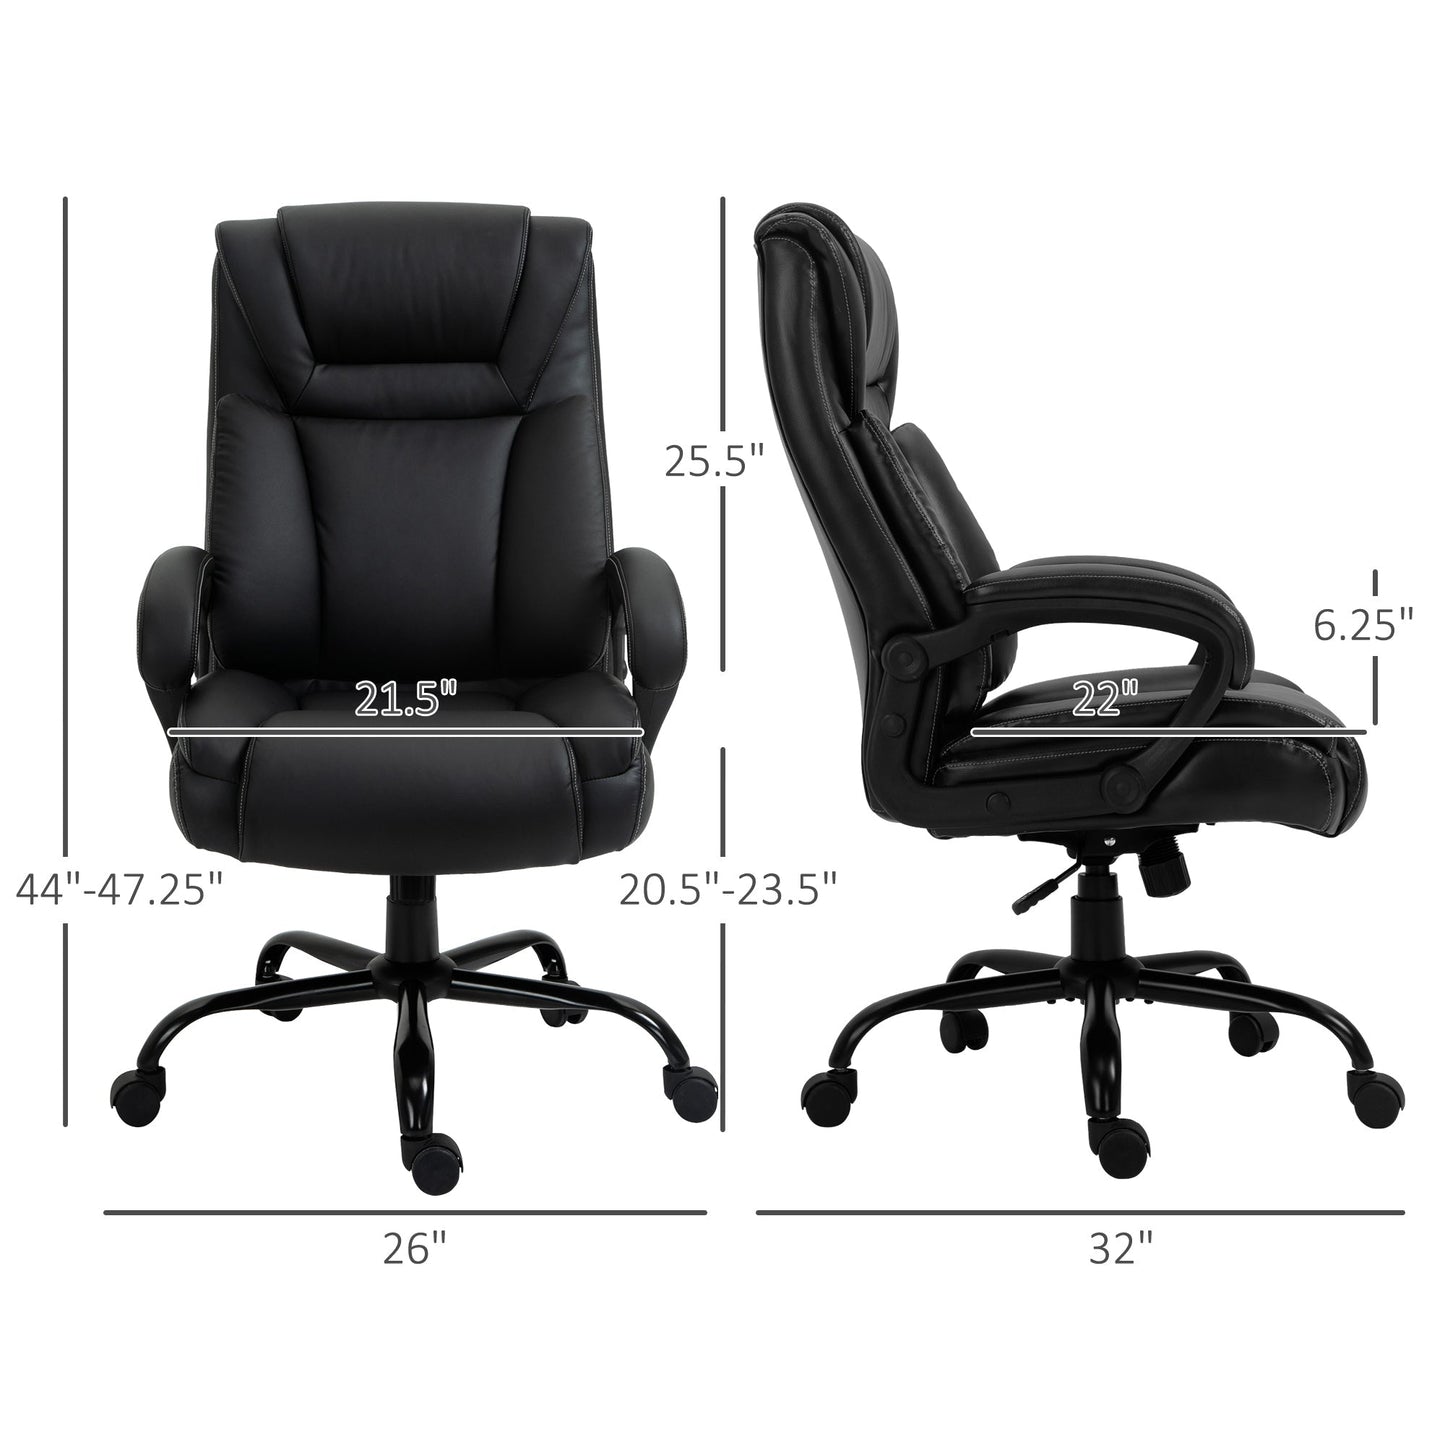 Big and Tall 400lbs Executive Office Chair with Wide Seat, Computer Desk Chair with High Back PU Leather Ergonomic Upholstery, Adjustable Height and Swivel Wheels, Black